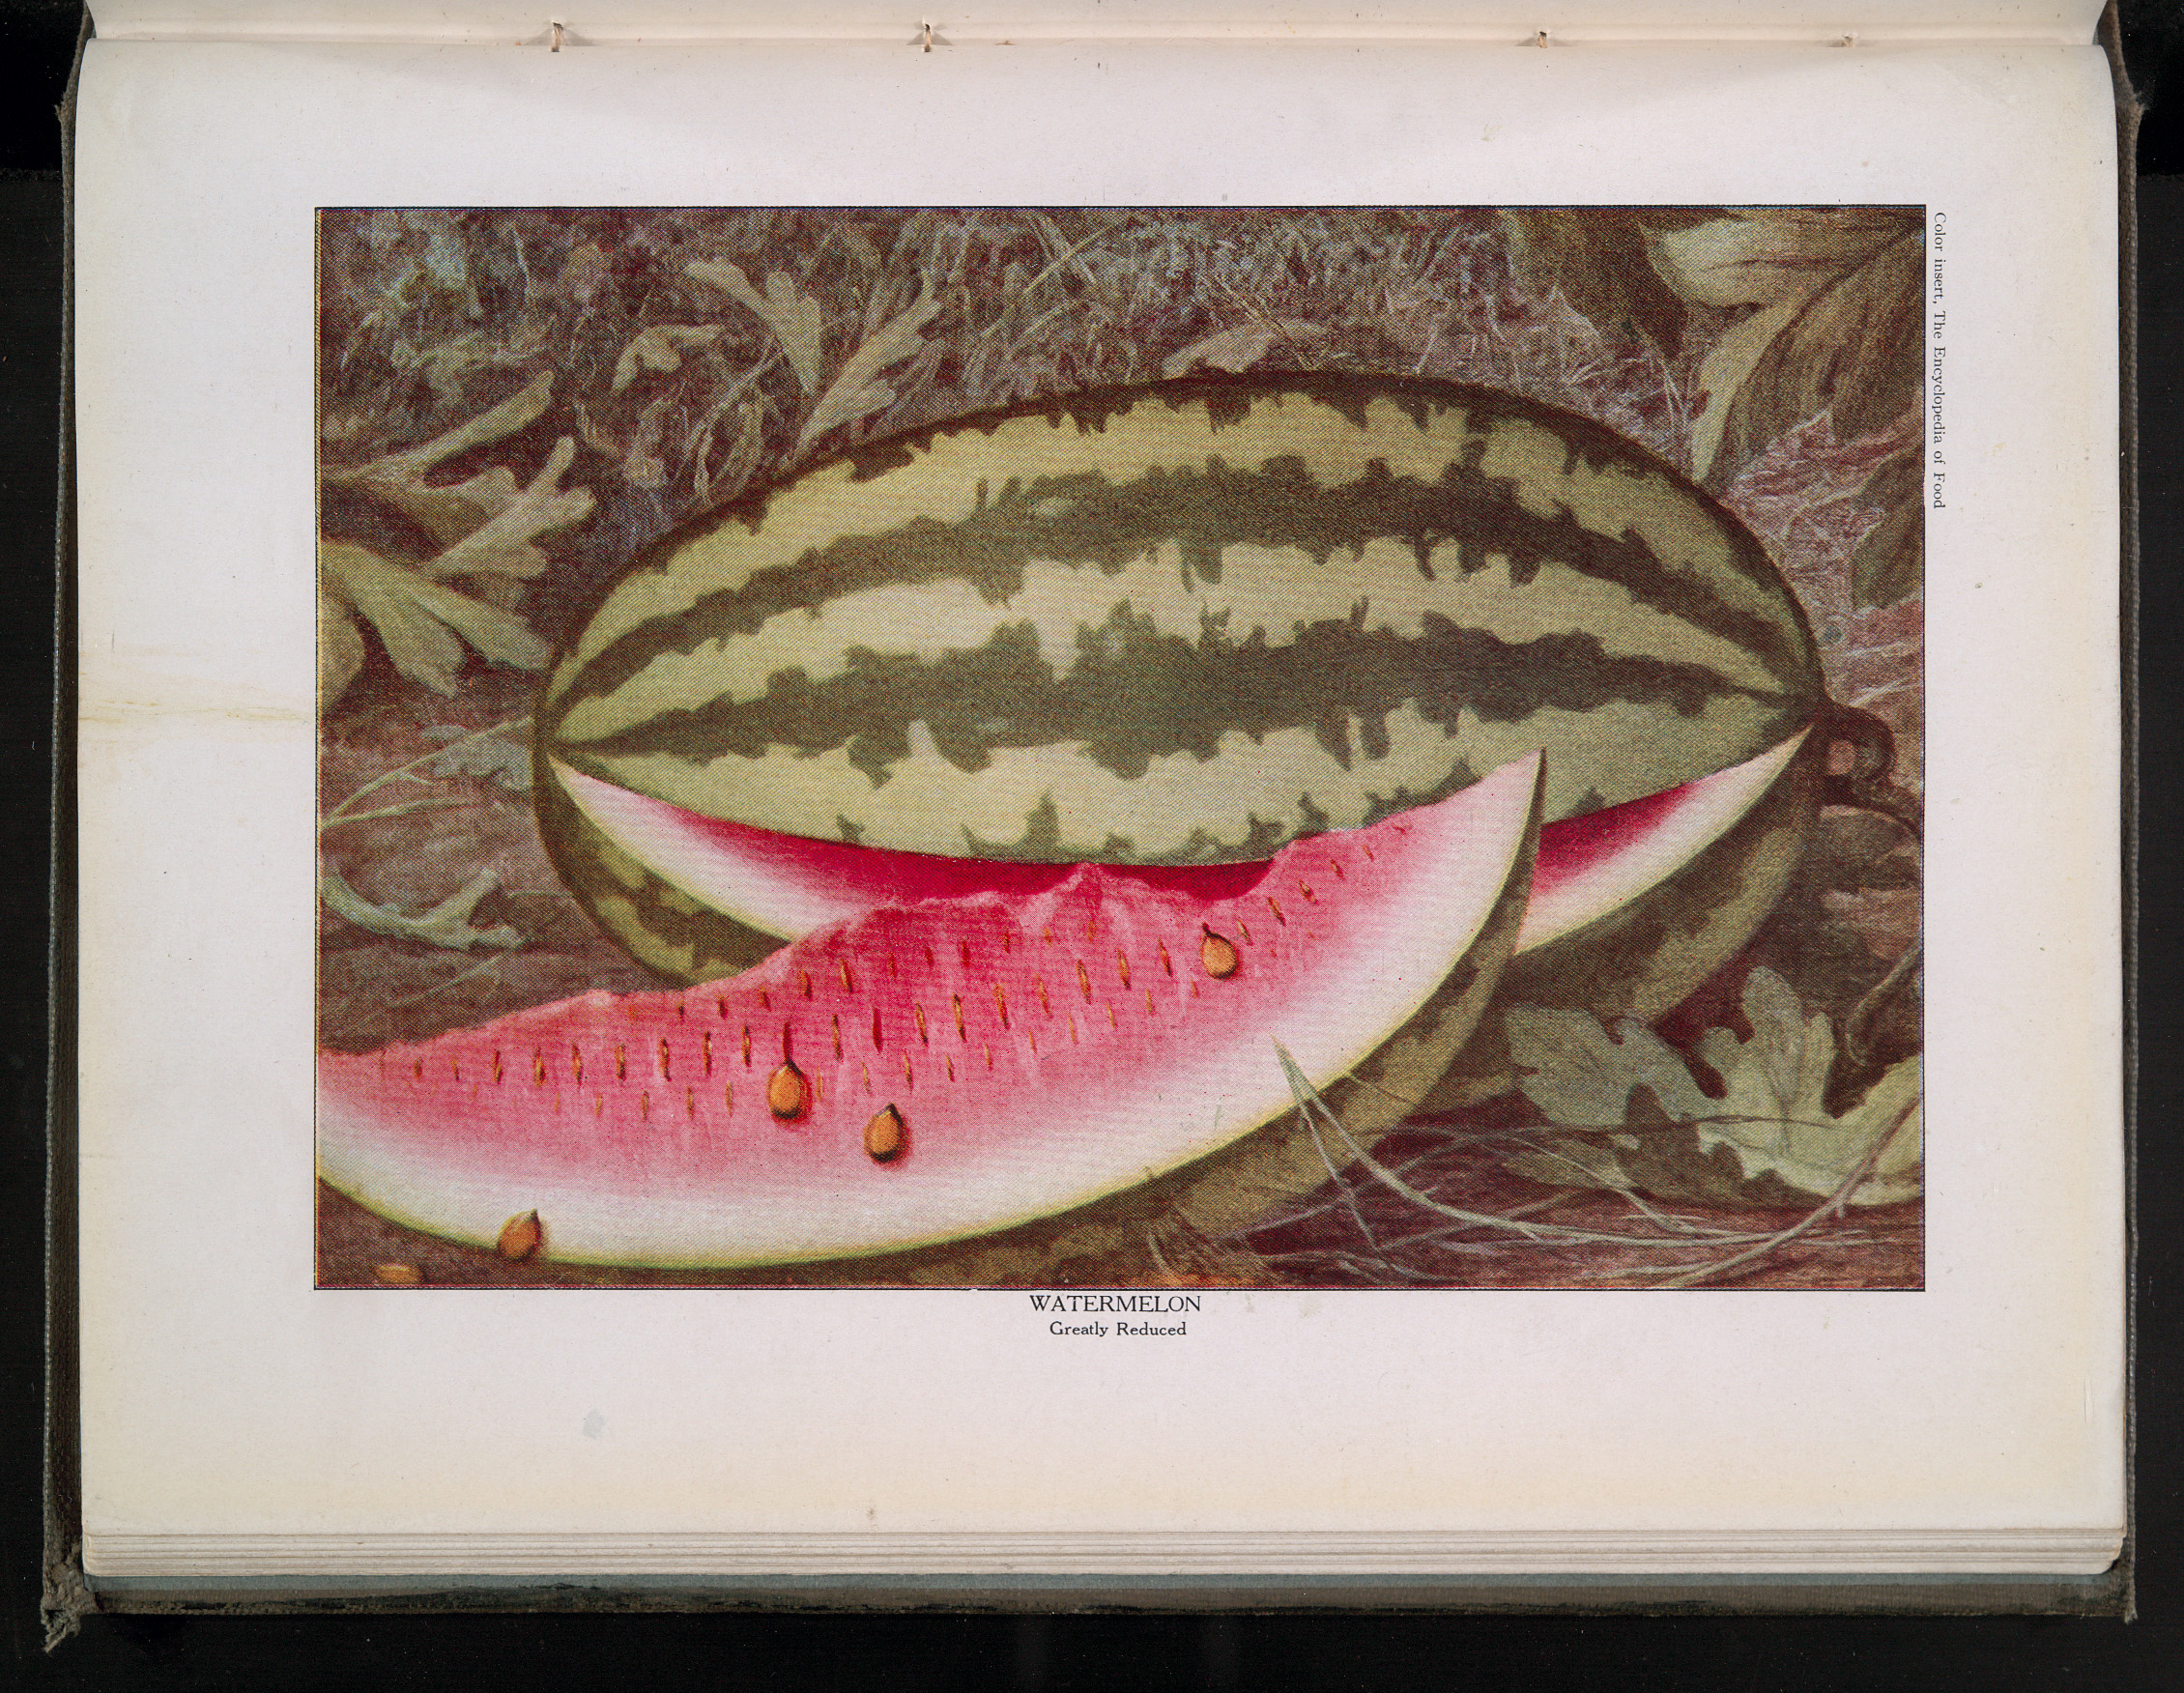 p 556, Watermelon from The Encyclopedia of Food.